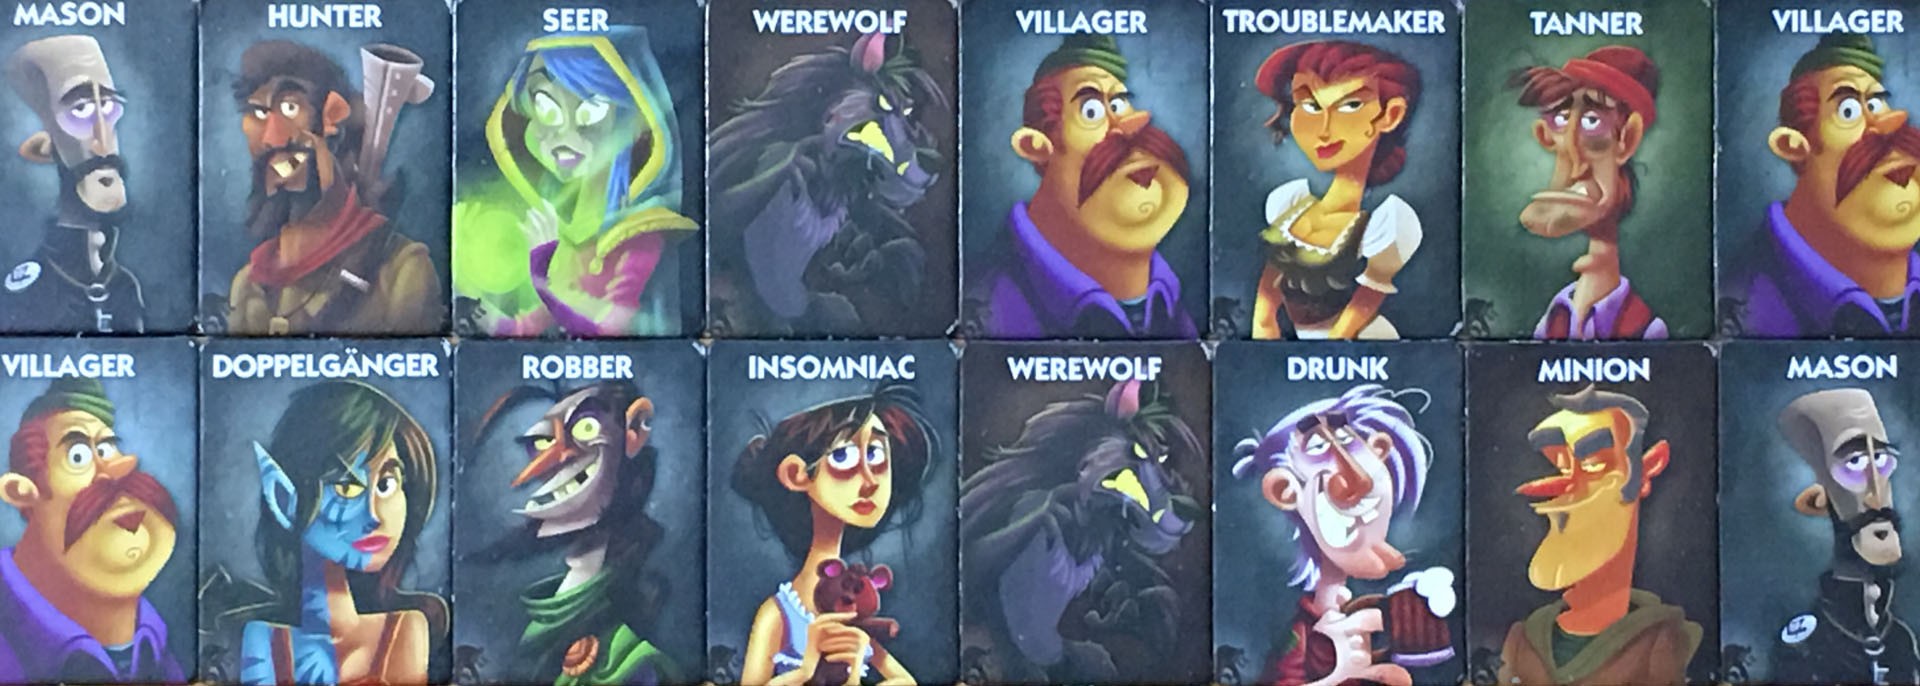 Let's Play ONE NIGHT ULTIMATE WEREWOLF